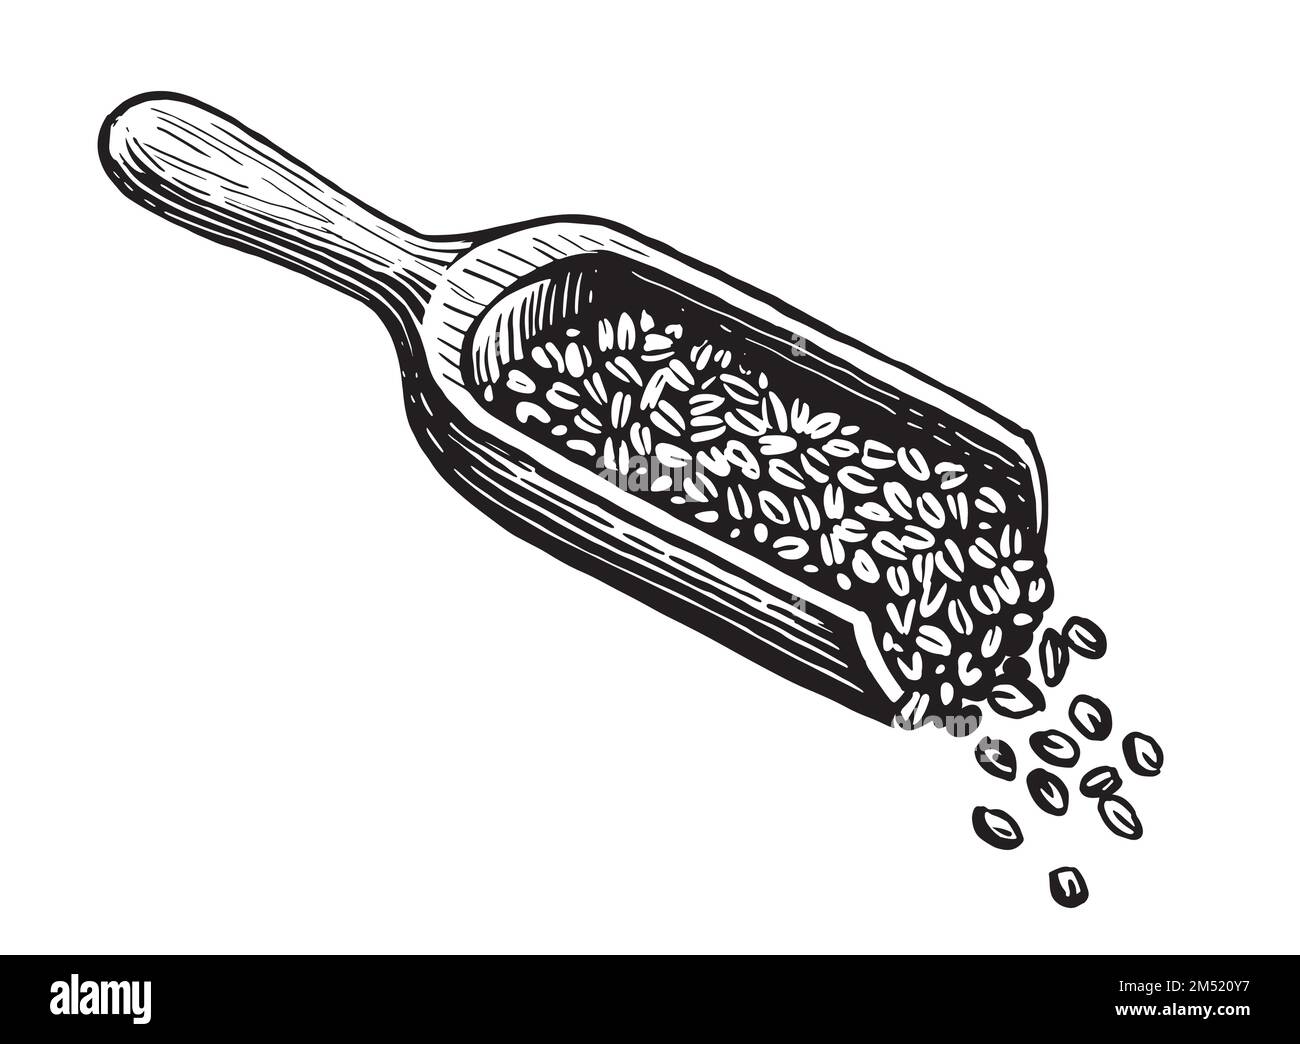 Coffee beans in a wooden scoop, sketch style. Preparing a fresh, invigorating drink with caffeine. Vintage vector Stock Vector